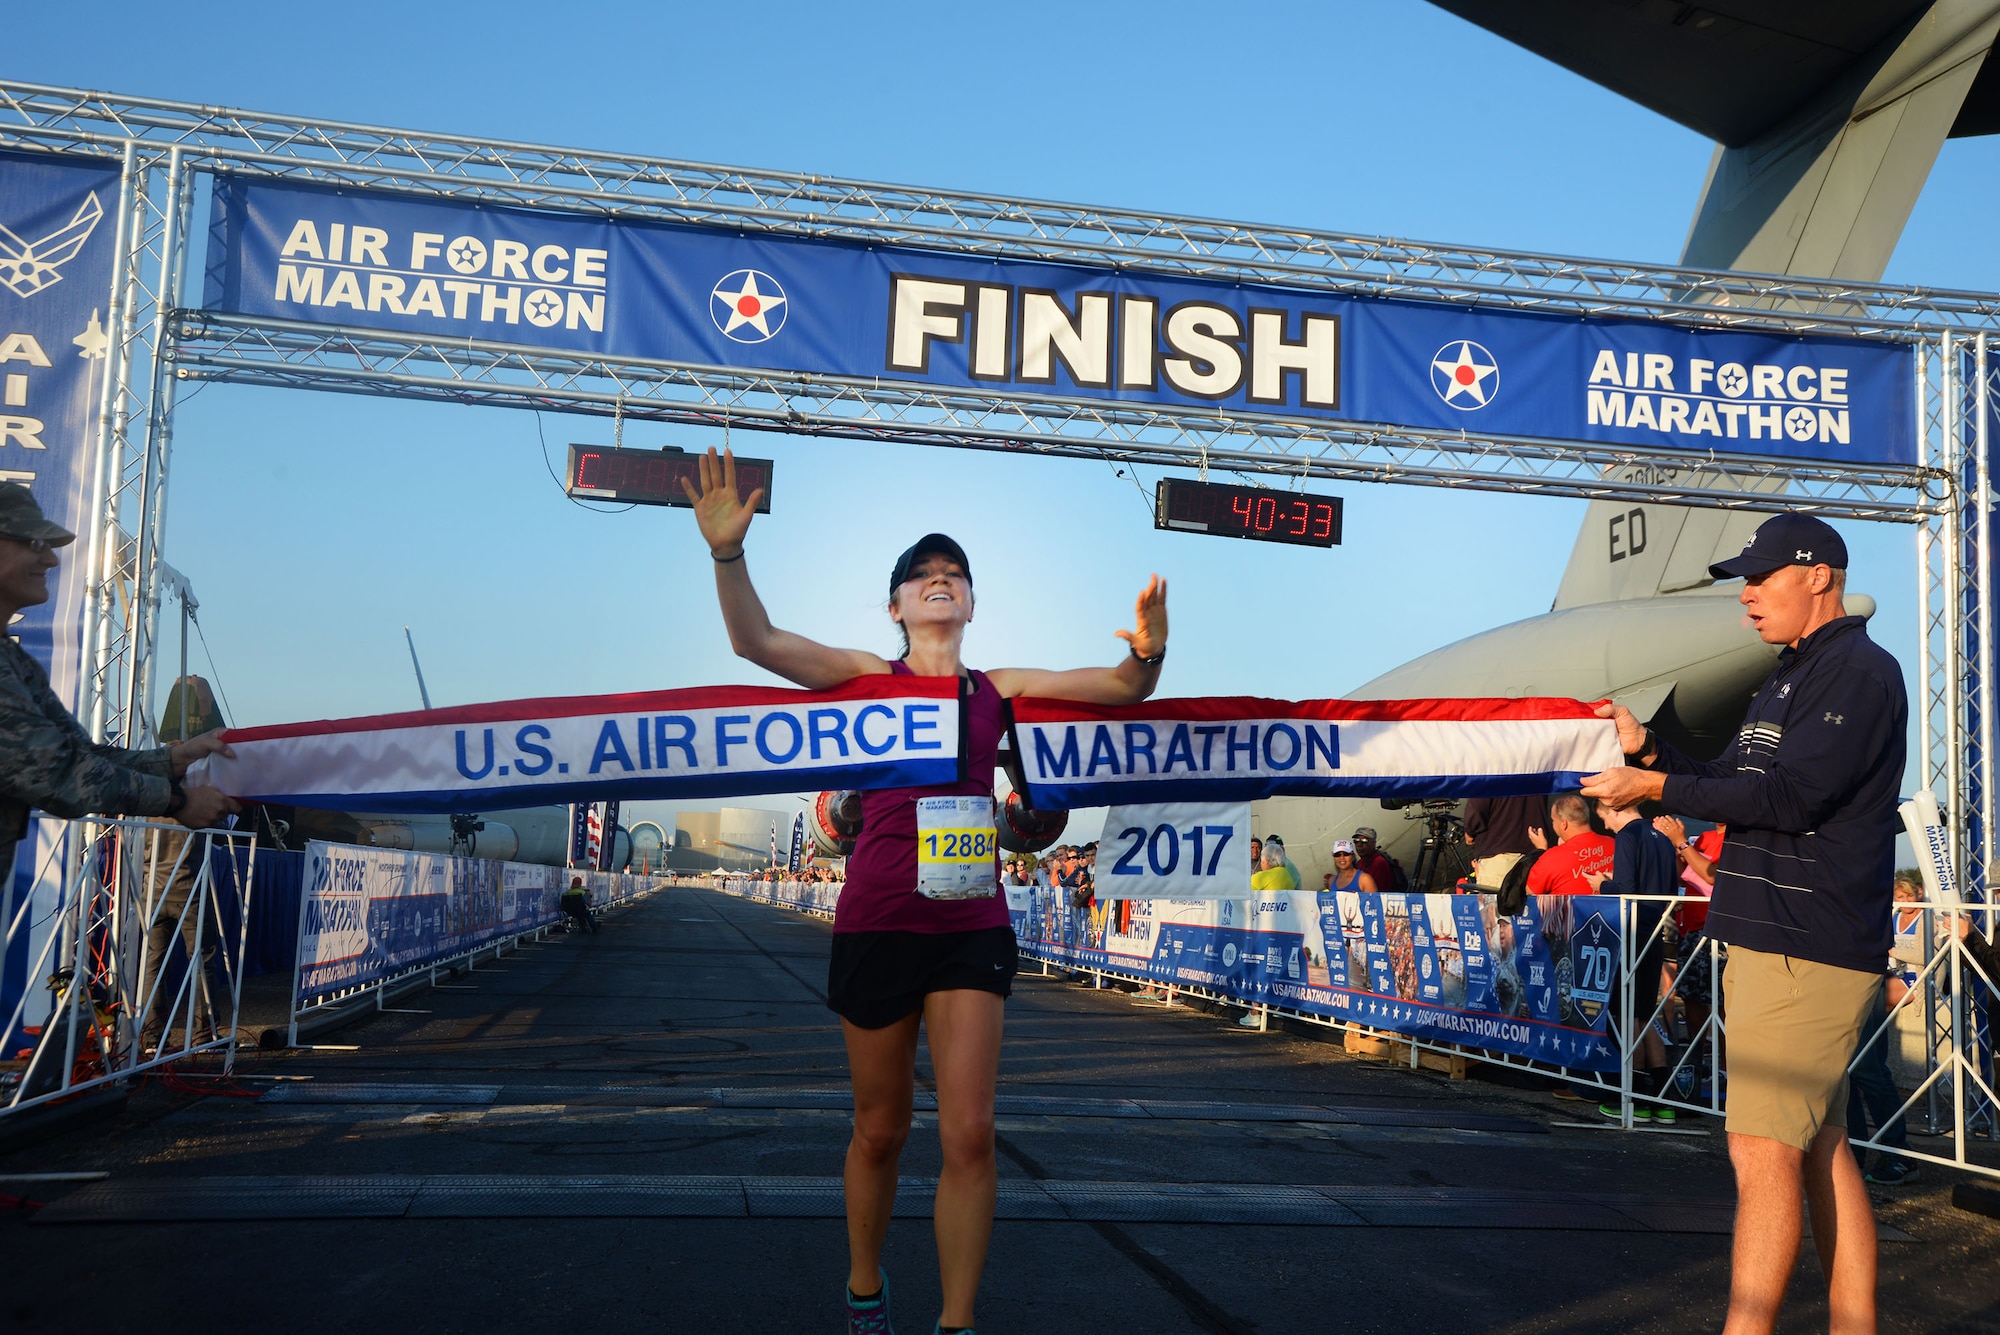 Molly Brown crosses the finish line as the overall women's winner of the 10K race at the 21st running of the 2017 U.S. Air Force Marathon at Wright-Patterson Air Force Base on Sept. 16.  Brown, from Grove City, Ohio, finished with a time of 33:04.  (U.S. Air Force photo / R.J. Oriez)